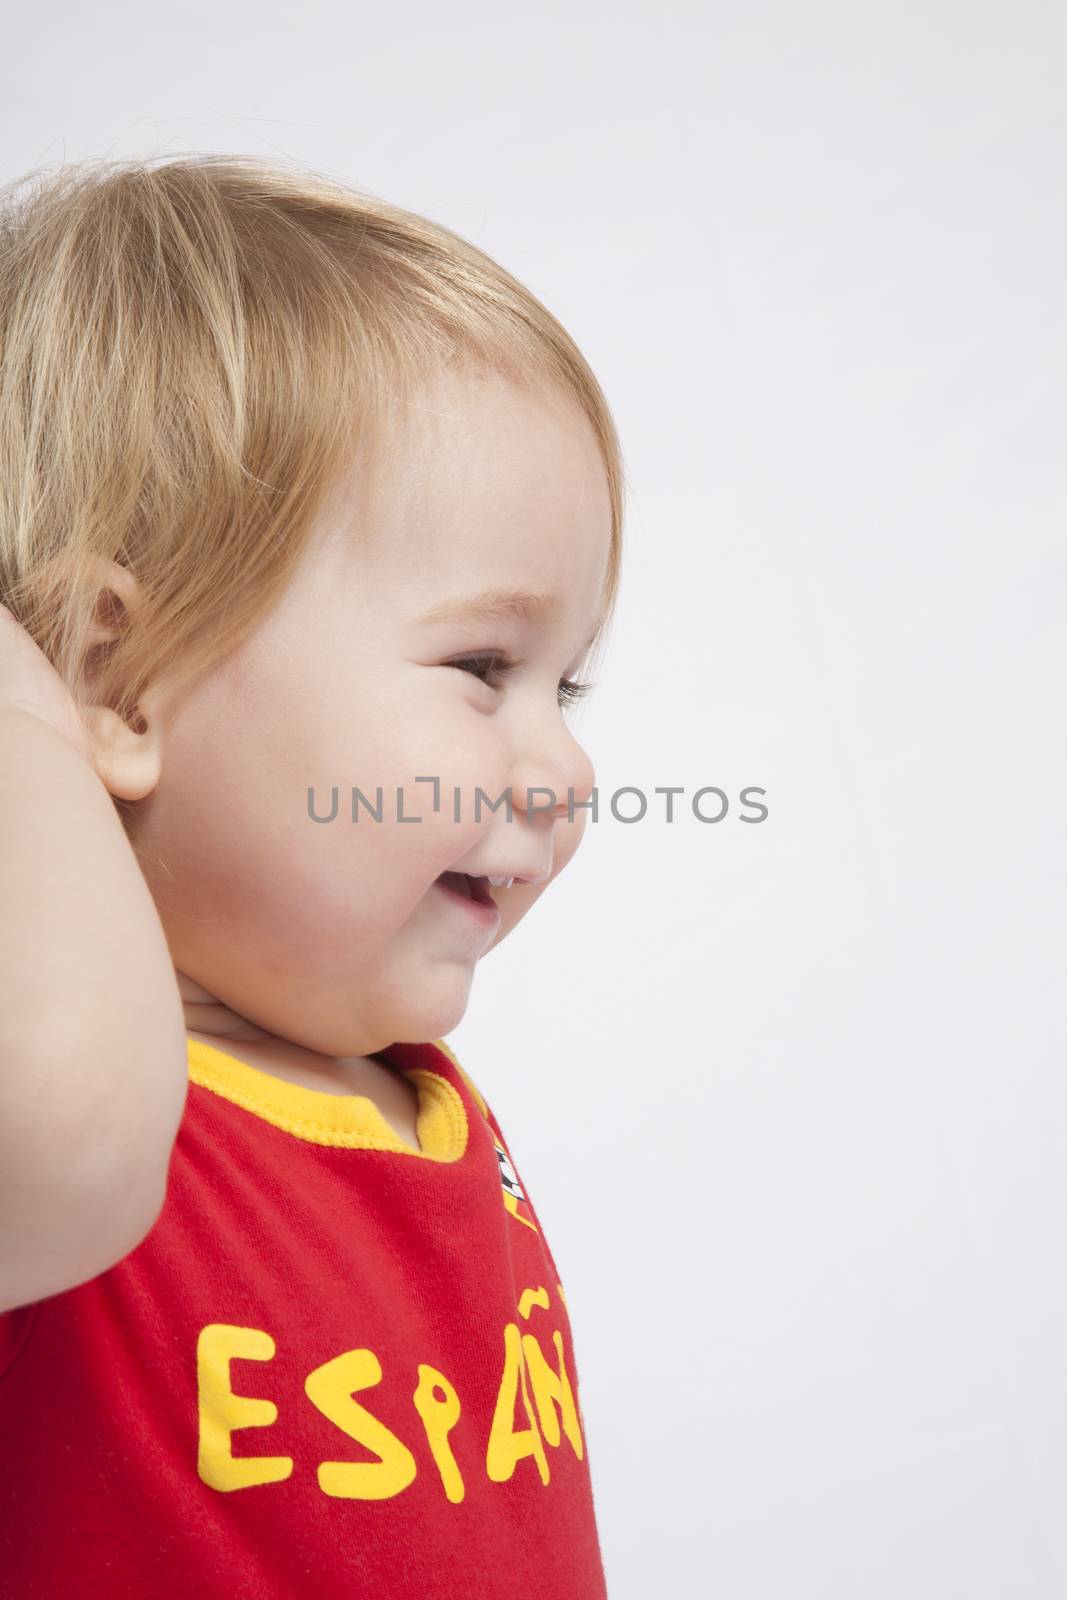 blonde baby sixteen month old with red shirt of Spanish soccer team